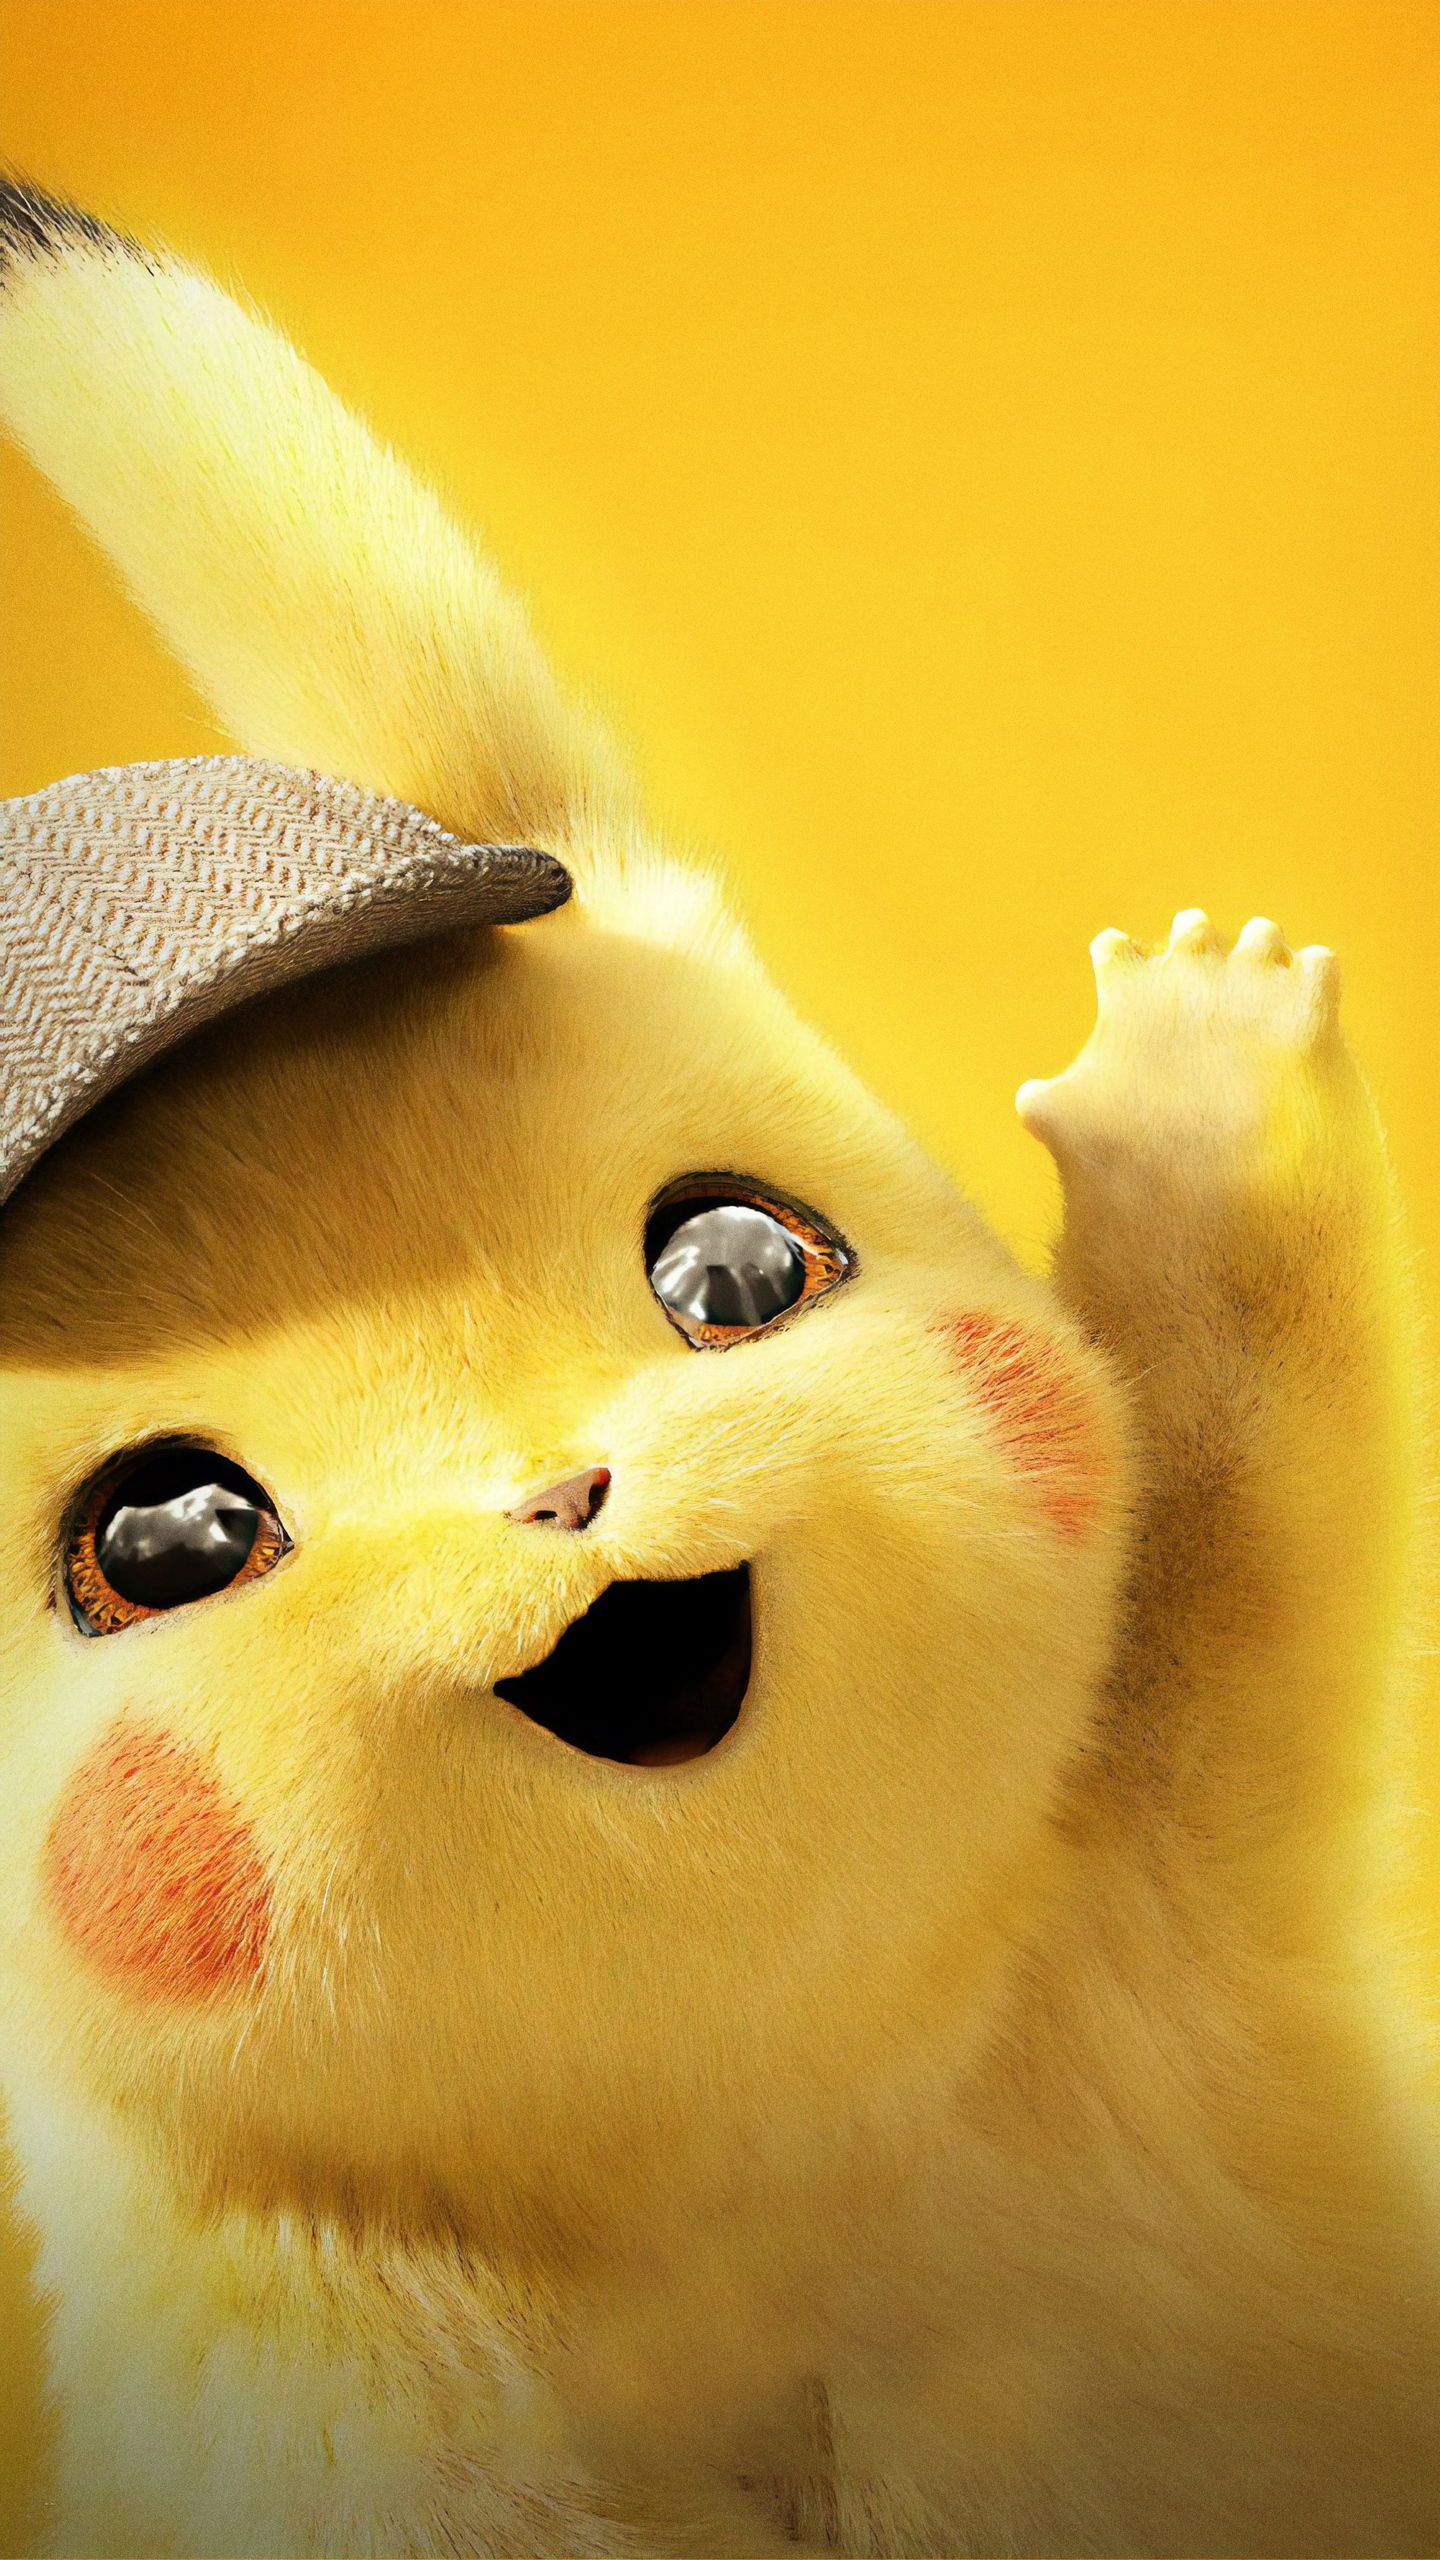 A yellow pikachu with hat and gloves - Pikachu